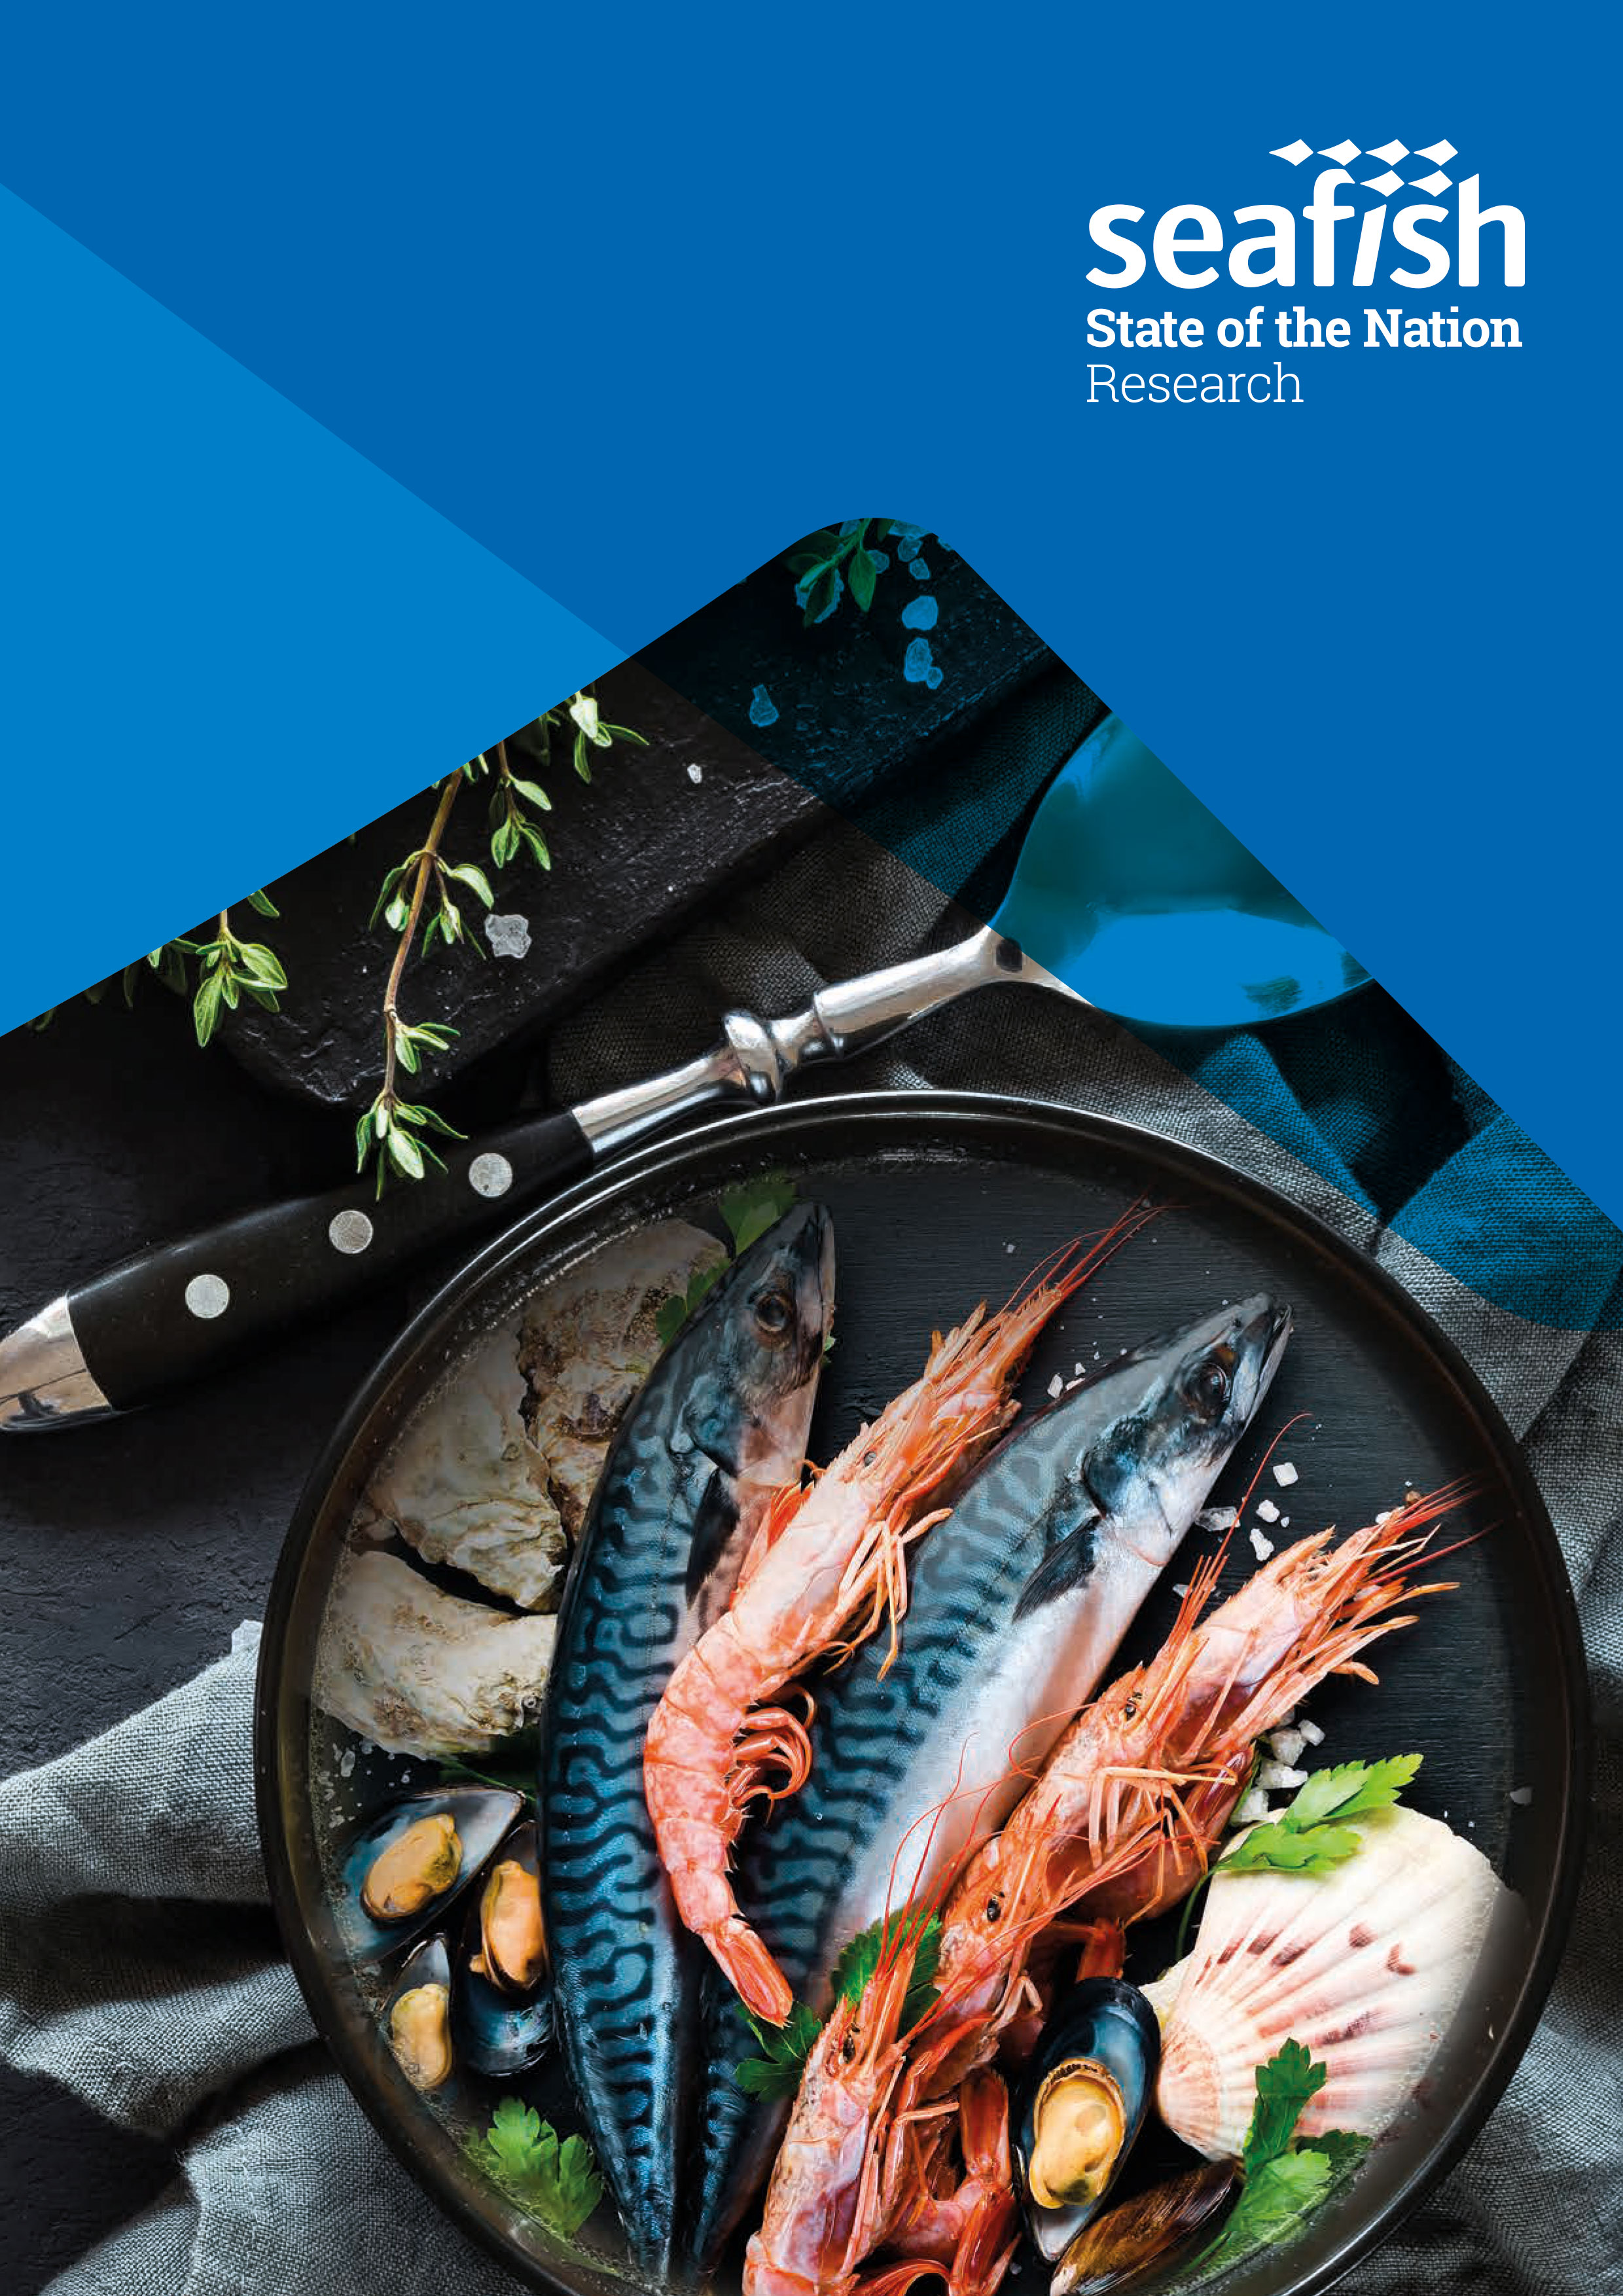 Seafish Report: More Than Half of UK Consumers Want to Eat More Seafood